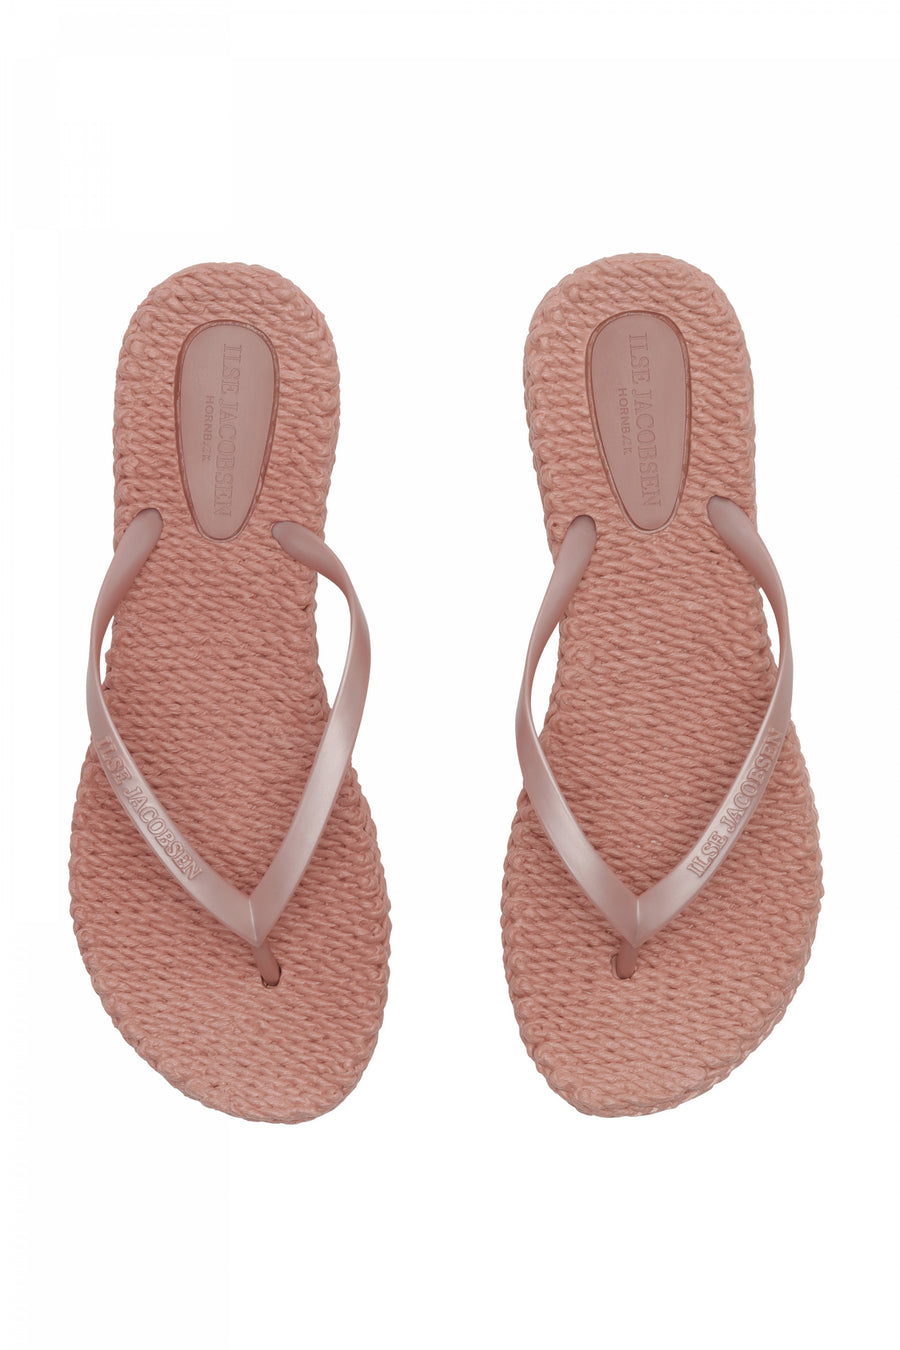 Slippers CHEERFUL02 - 900 Misty Rose | Misty Rose